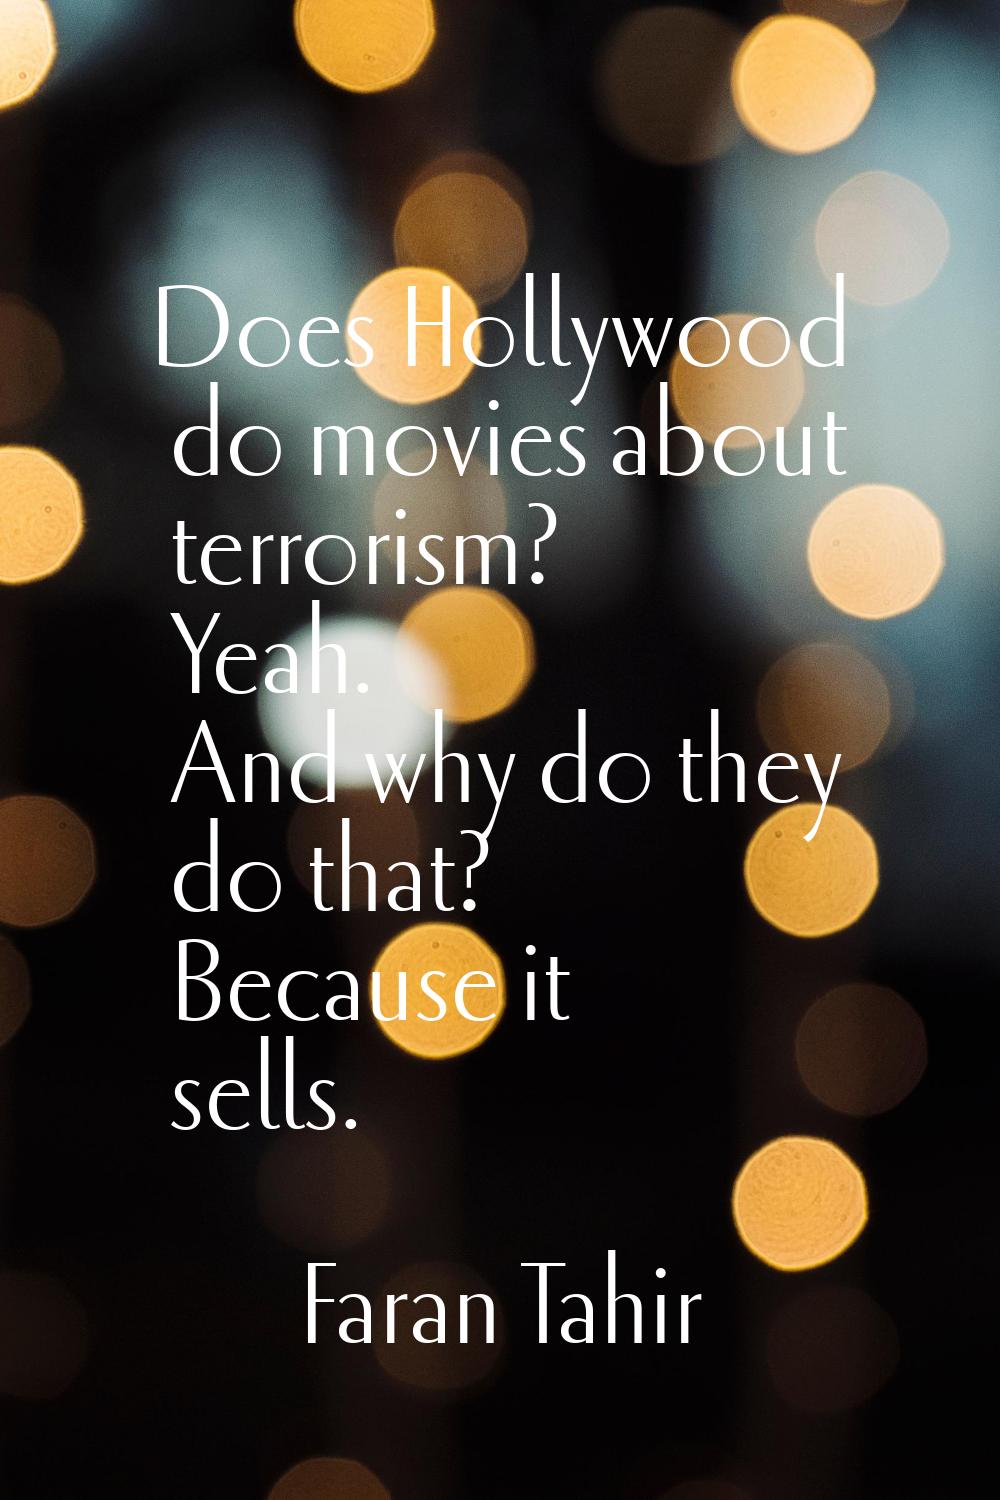 Does Hollywood do movies about terrorism? Yeah. And why do they do that? Because it sells.